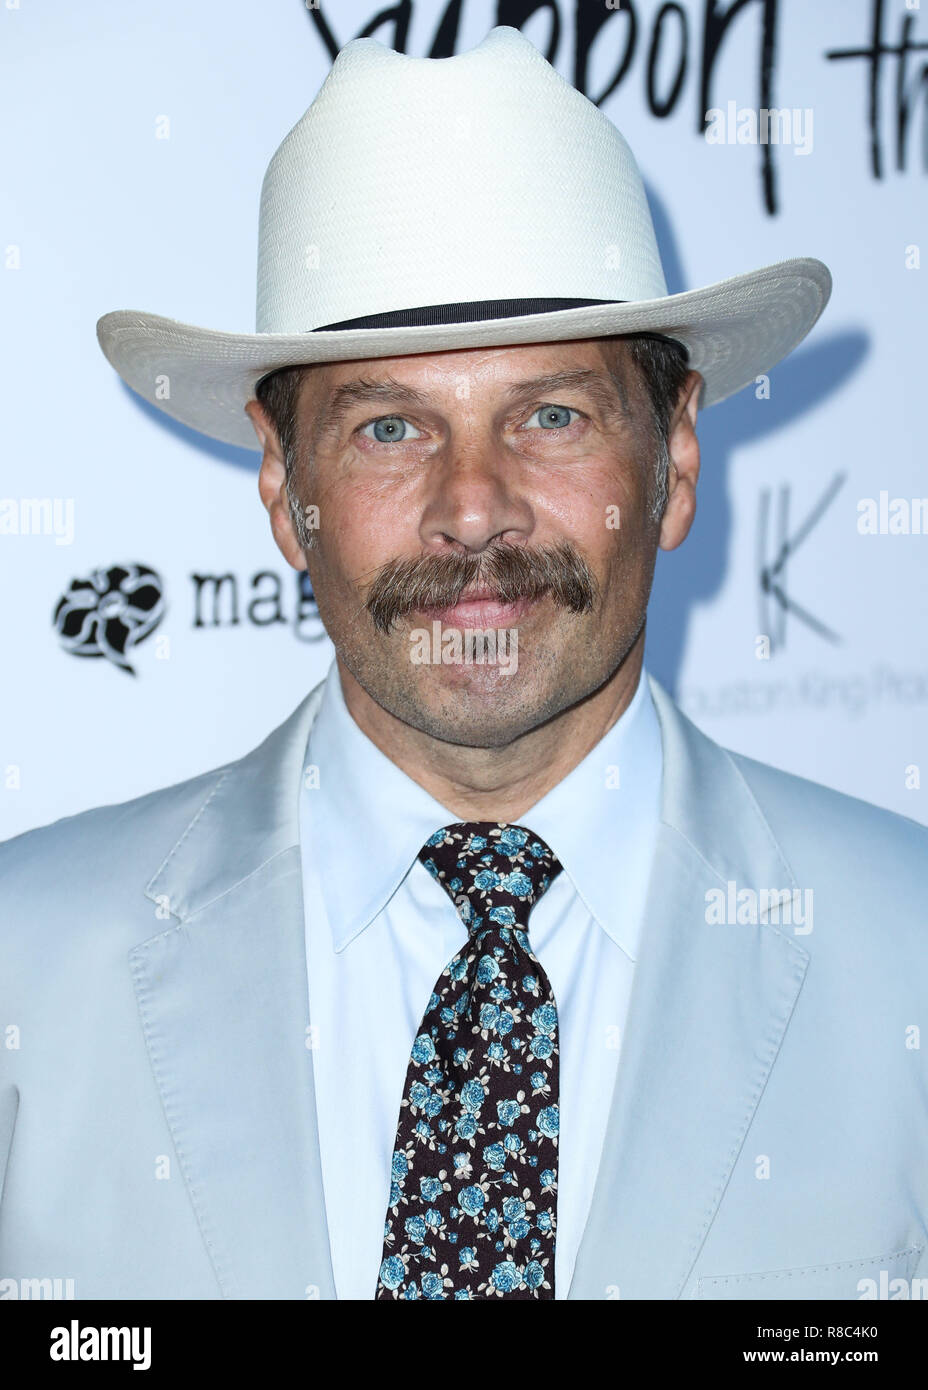 HOLLYWOOD, LOS ANGELES, CA, USA - AUGUST 22: James LeGros at the Los Angeles Premiere Of Magnolia Pictures' 'Support The Girls' held at ArcLight Hollywood on August 22, 2018 in Hollywood, Los Angeles, California, United States. (Photo by Xavier Collin/Image Press Agency) Stock Photo